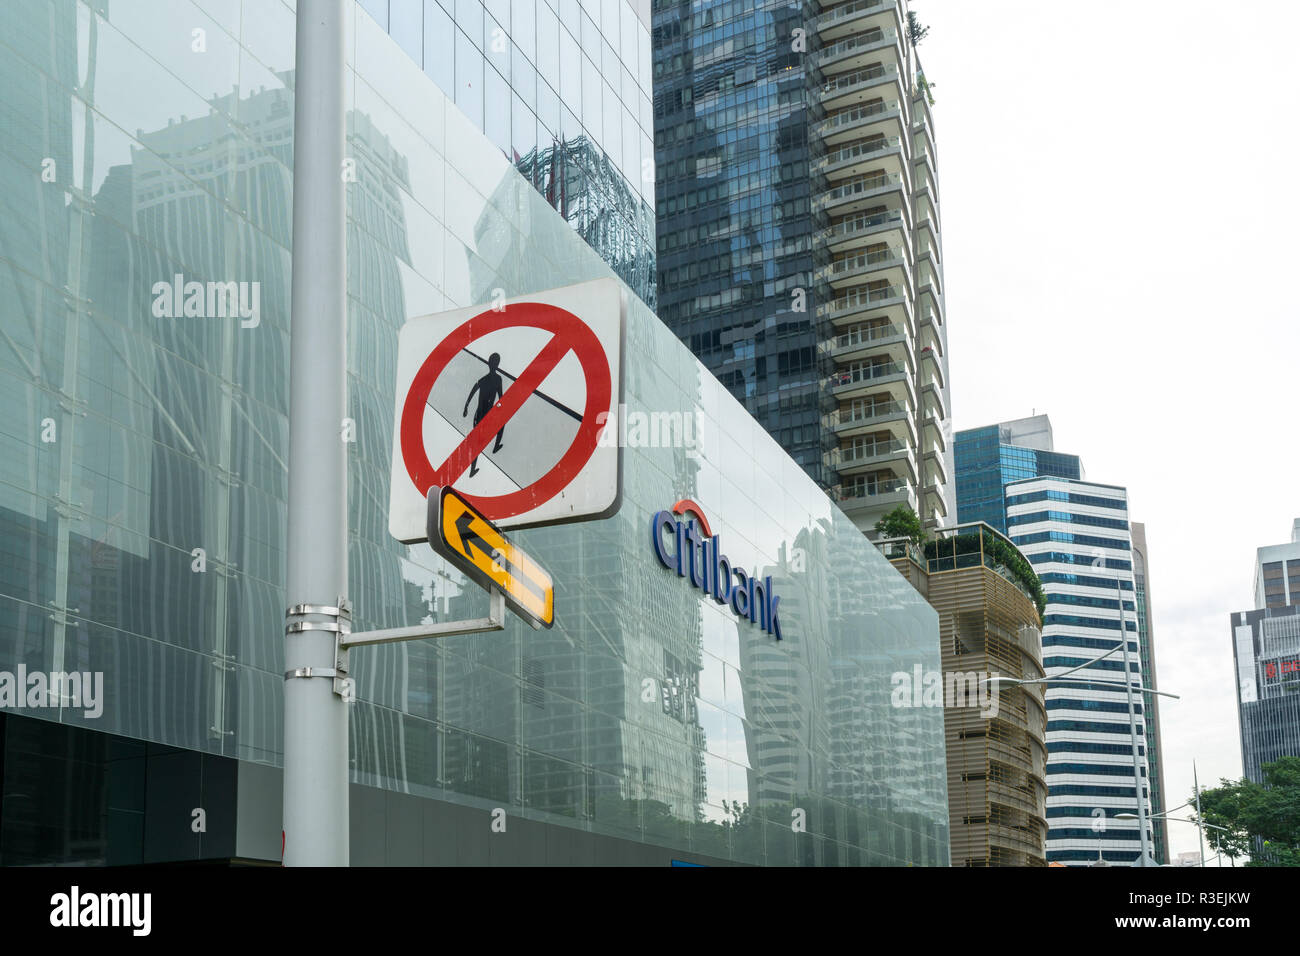 Singapore - September 16 2017: 'No pedestrians' road sign next to Citibank sign in the office building in Central Business District in Singapore with  Stock Photo